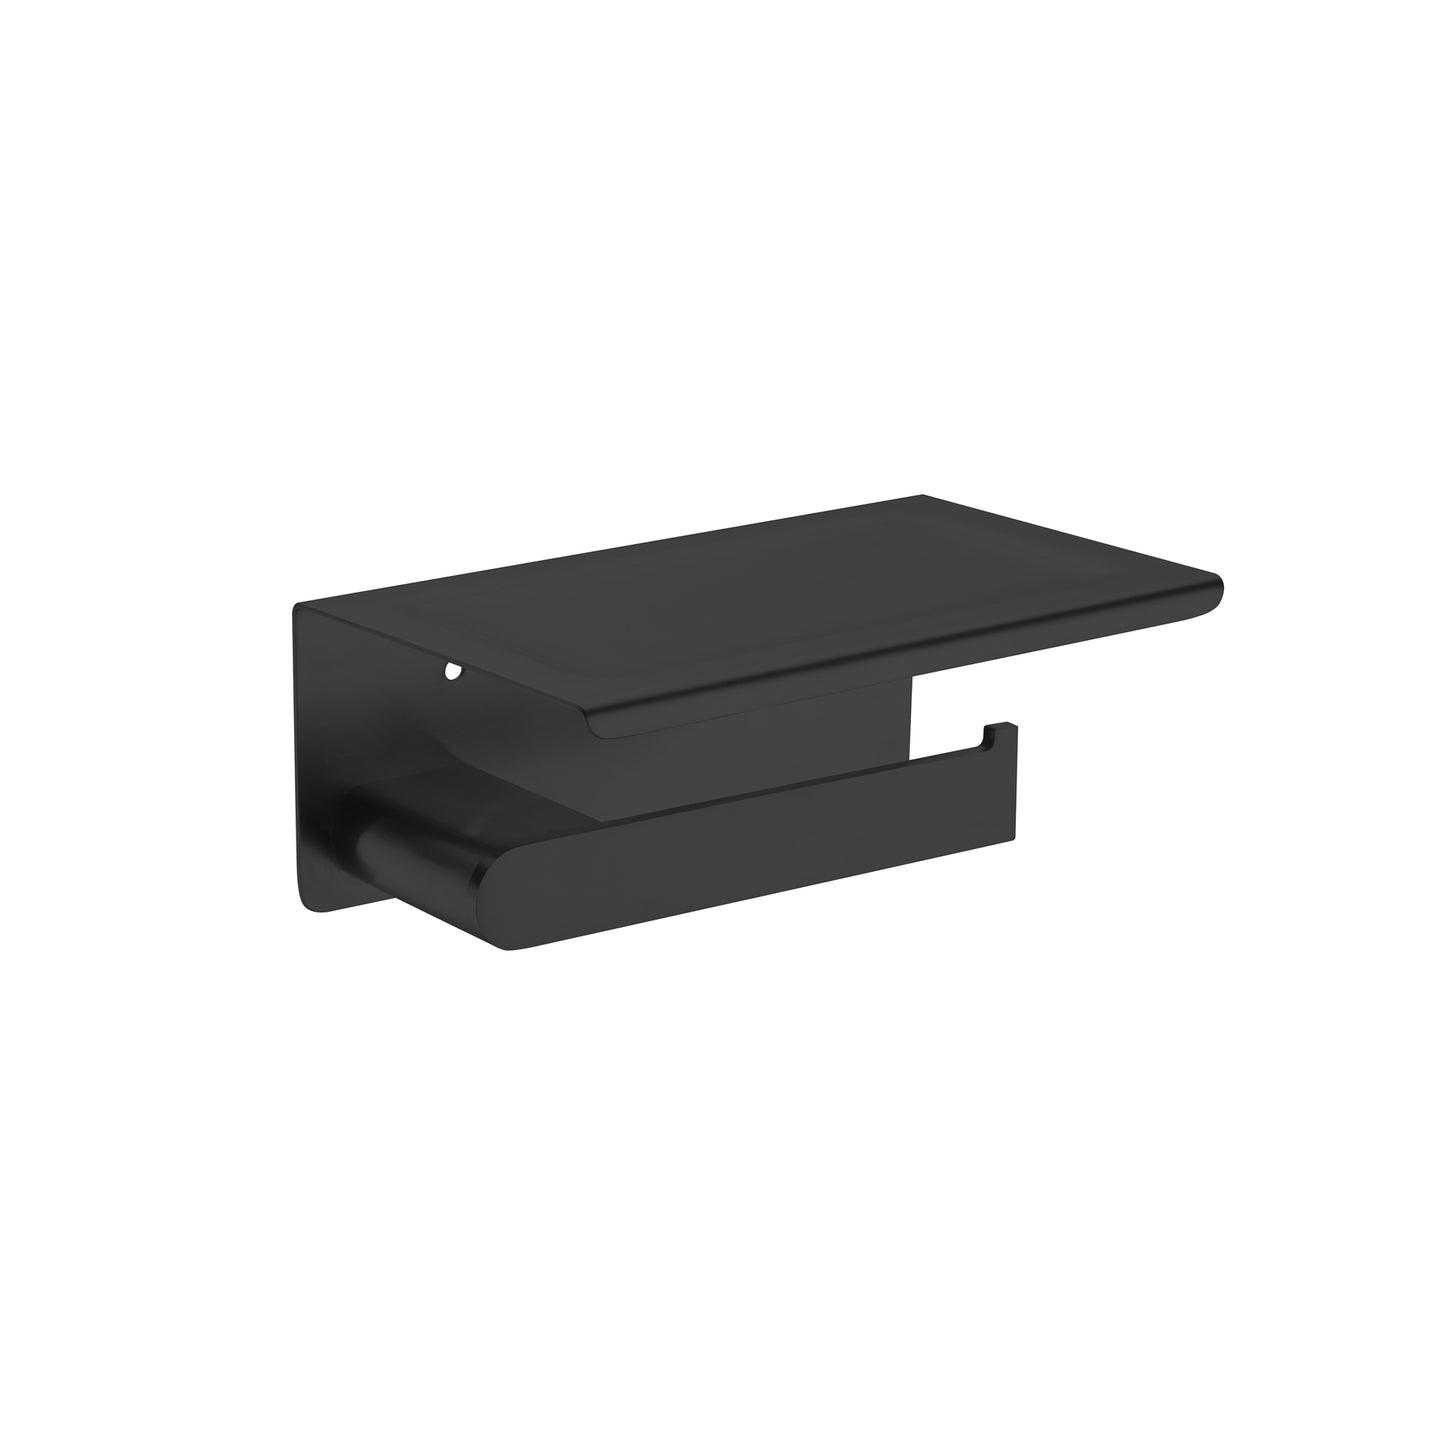 Bianca Range Matte Black Toilet Roll Holder With a Phone Stand